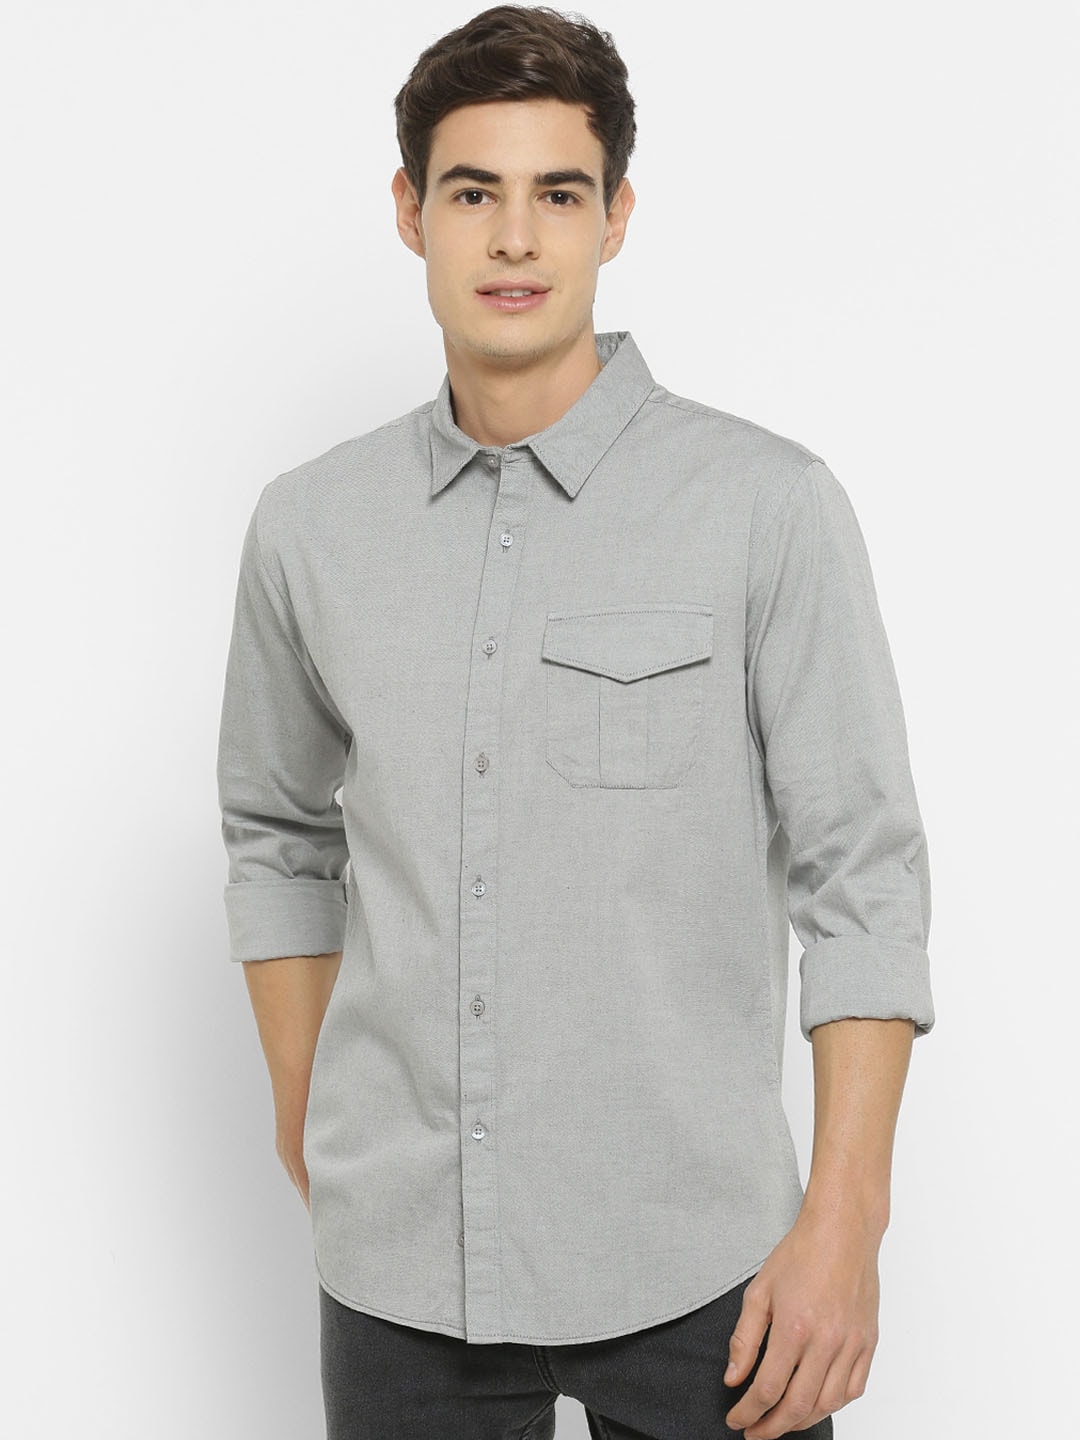 FOREVER 21 Men Grey Solid Slim Fit Cotton Casual Shirt